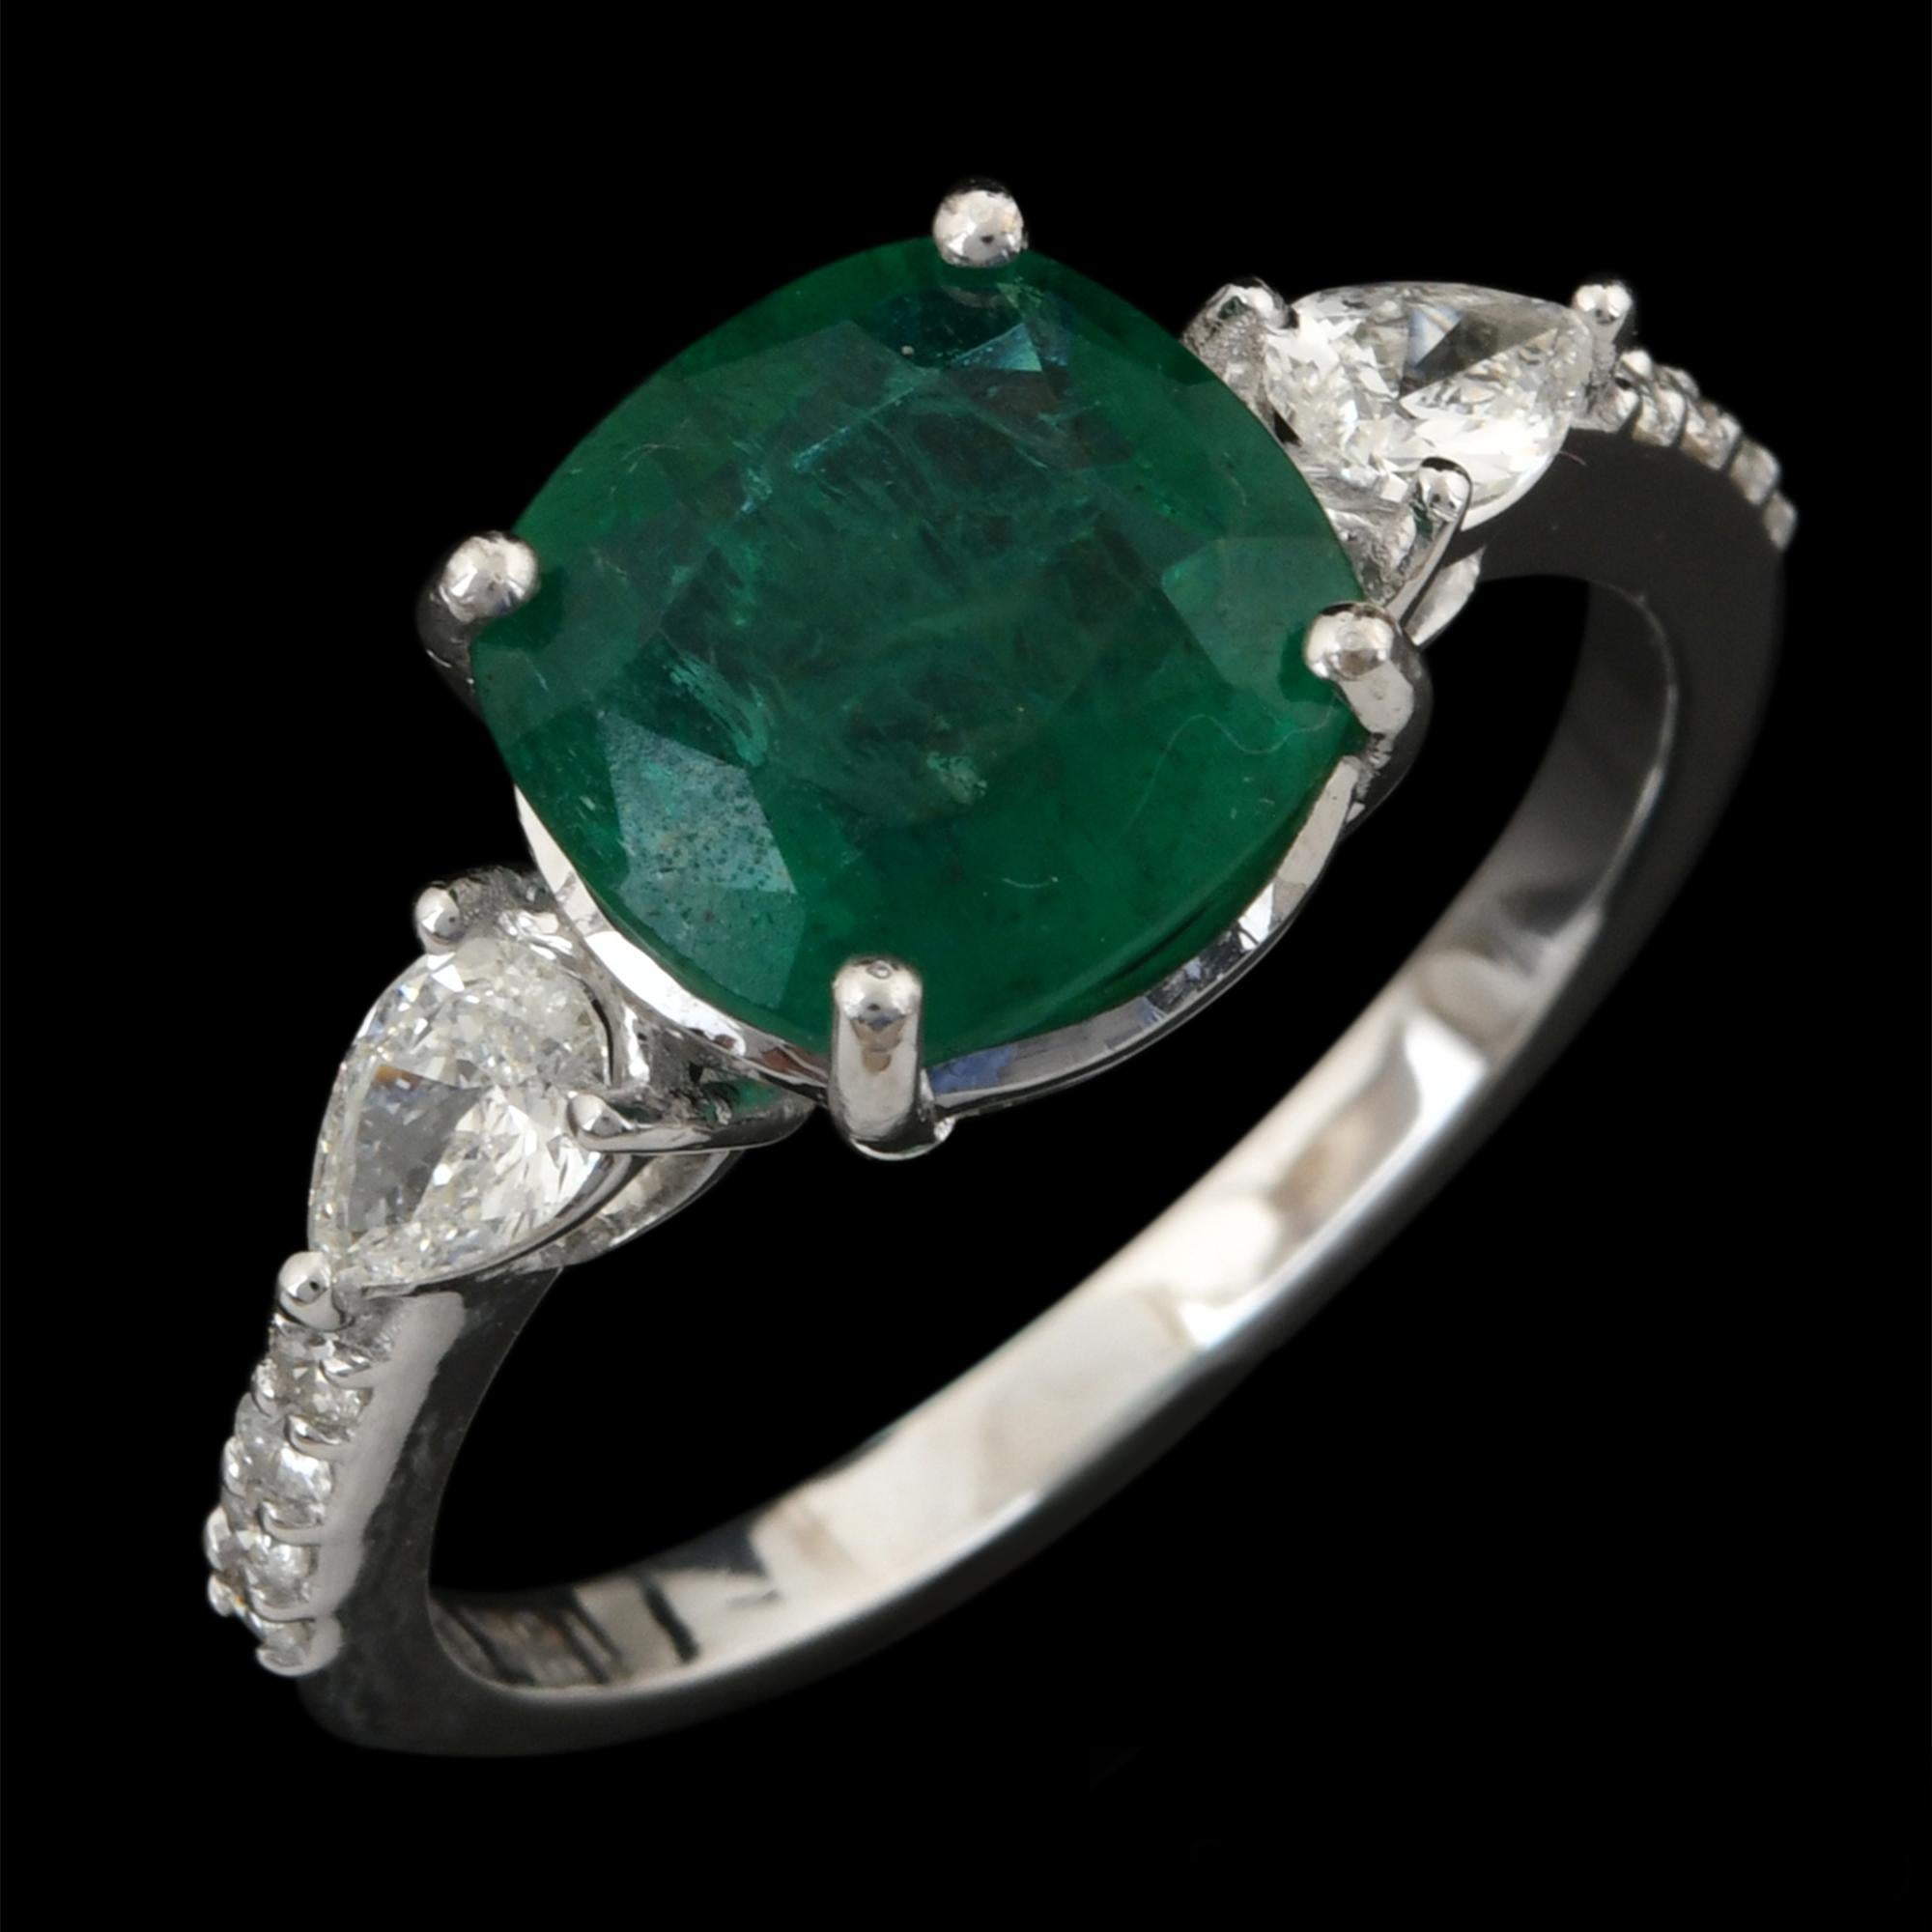 For Sale:  Natural Emerald Cocktail Ring Pear Diamond Solid 18k White Gold Handmade Jewelry 6